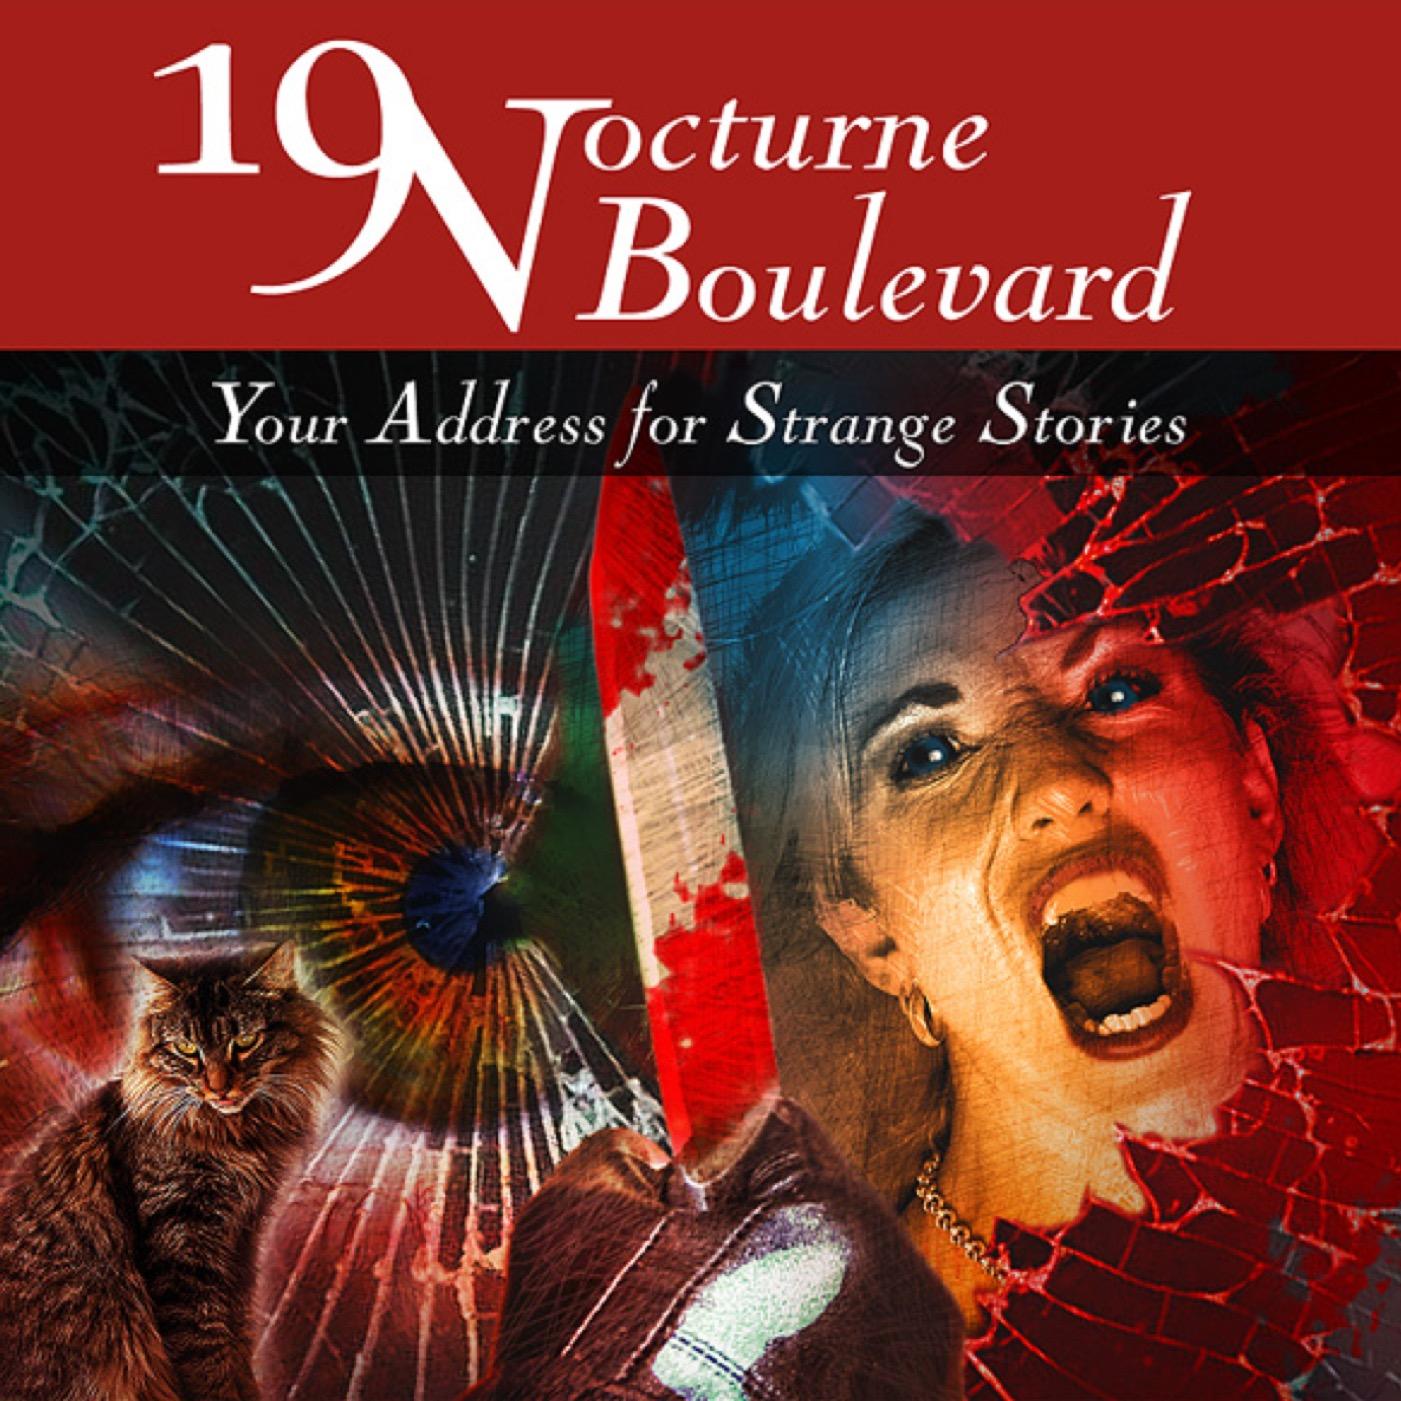 19 Nocturne Boulevard: The Shady Side of the Street